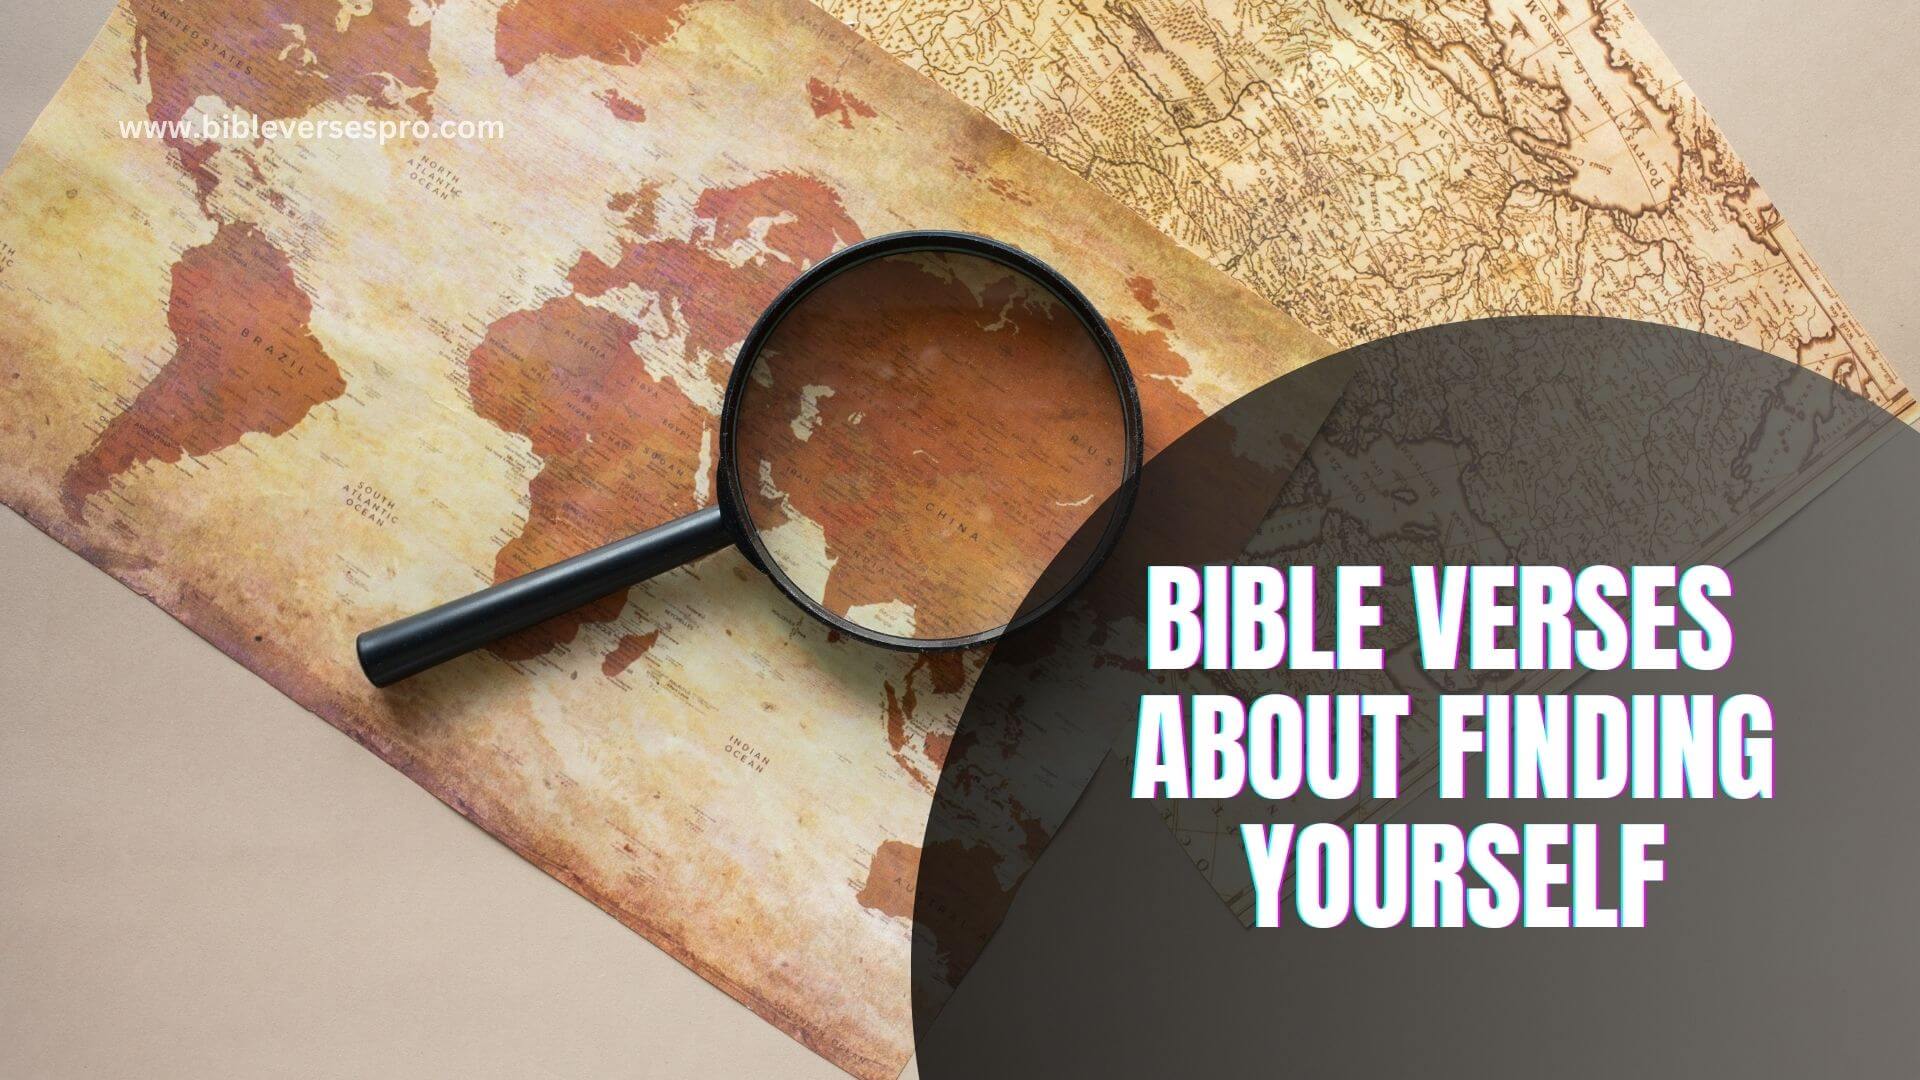 BIBLE VERSES ABOUT FINDING YOURSELF